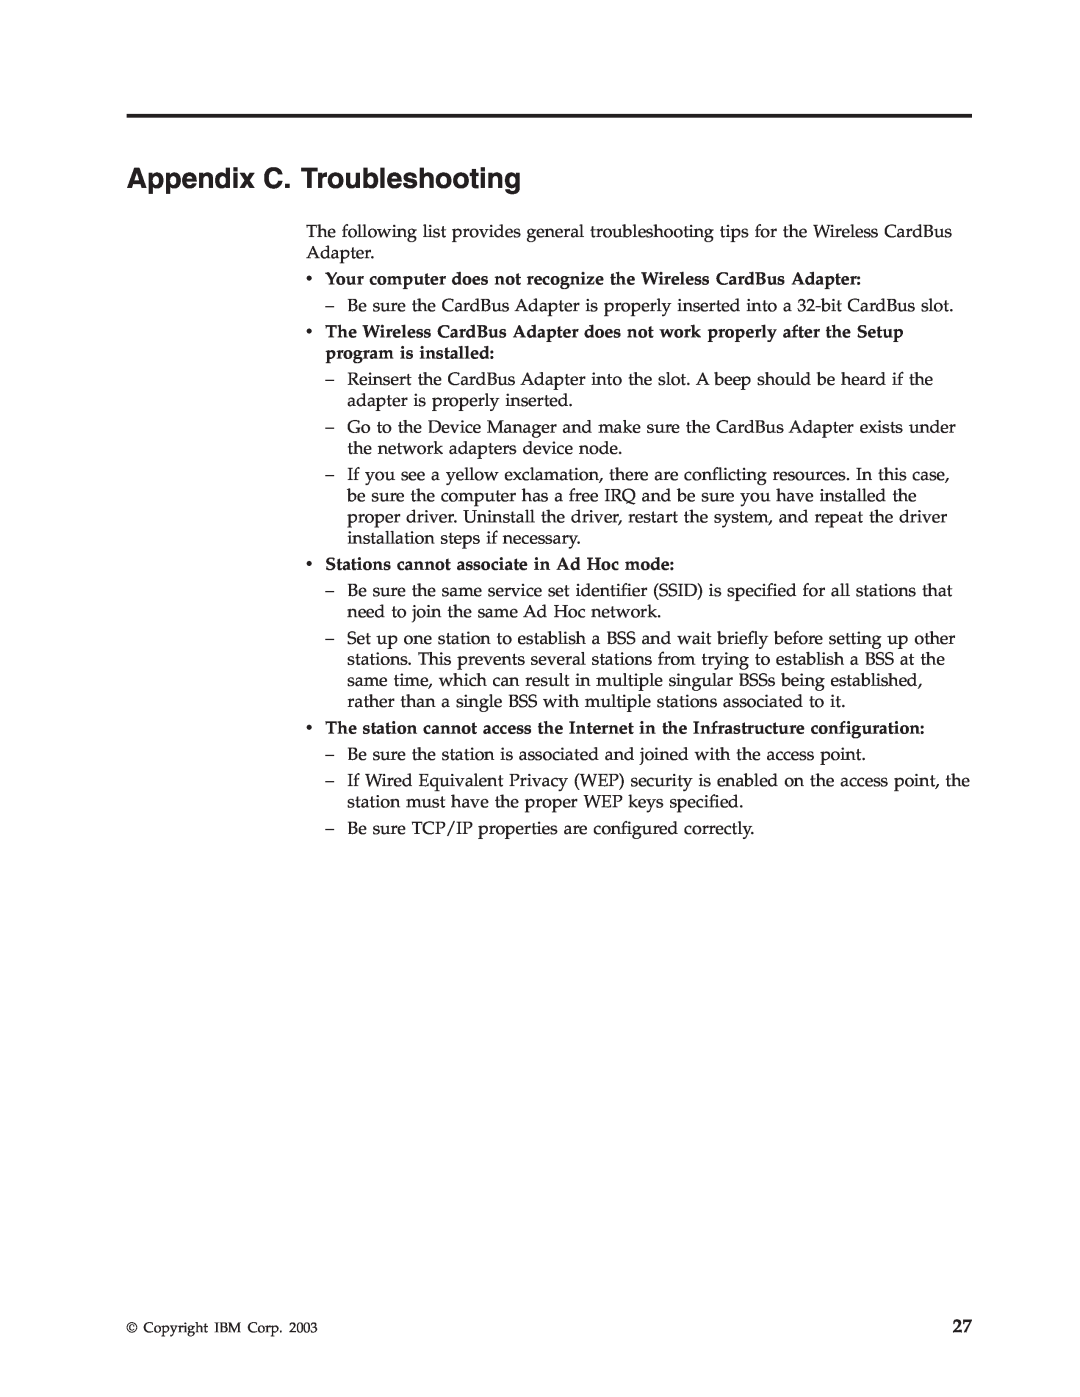 Trust Computer Products IBM 802.11a/b/g Wireless CardBus Adapter manual Appendix C. Troubleshooting 